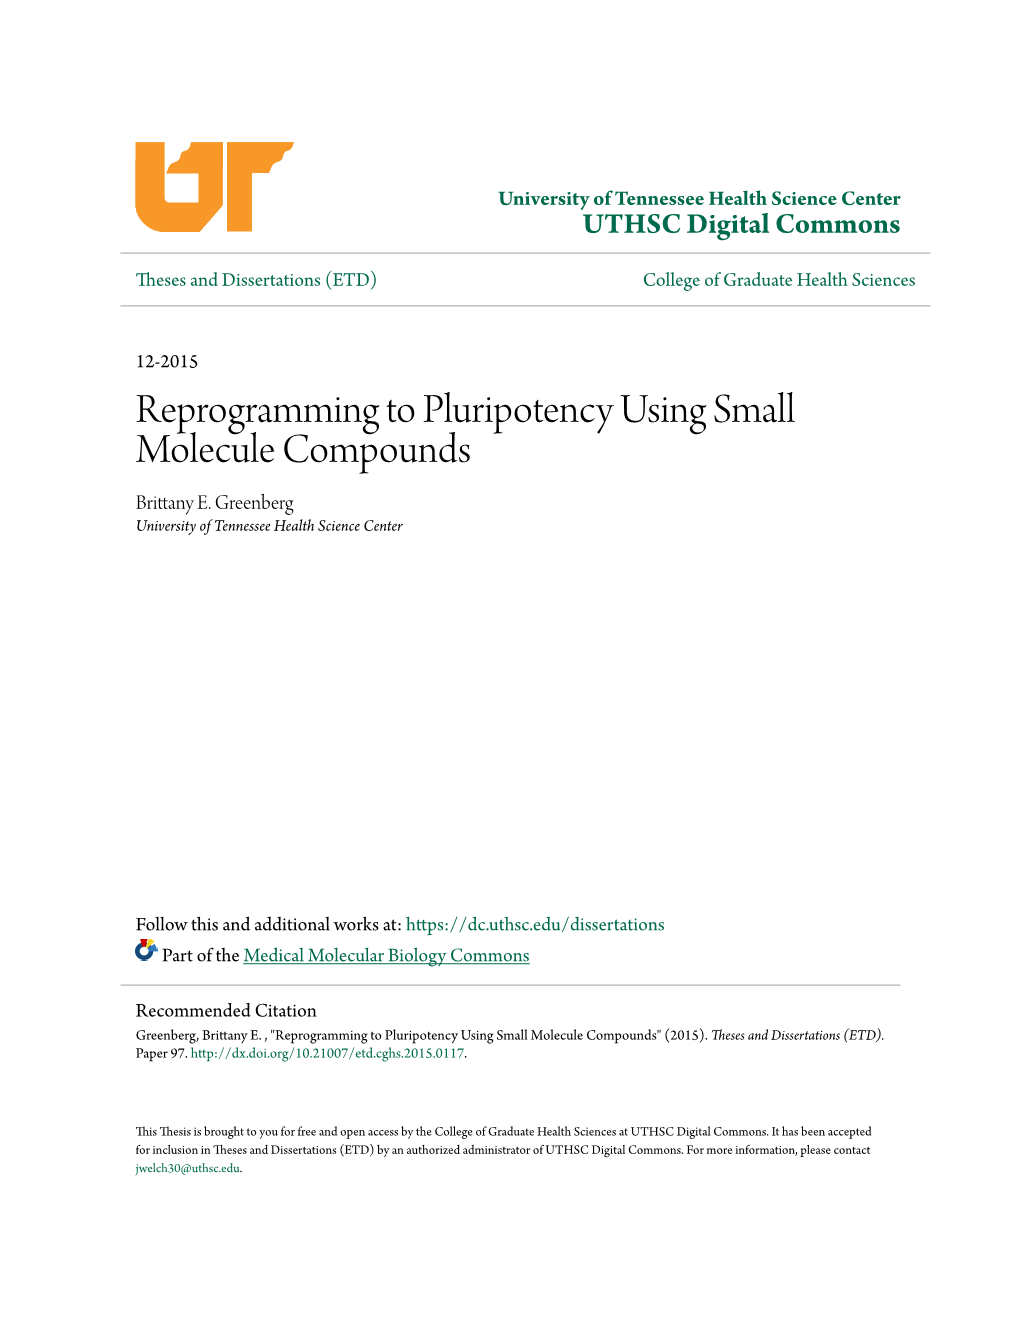 Reprogramming to Pluripotency Using Small Molecule Compounds Brittany E